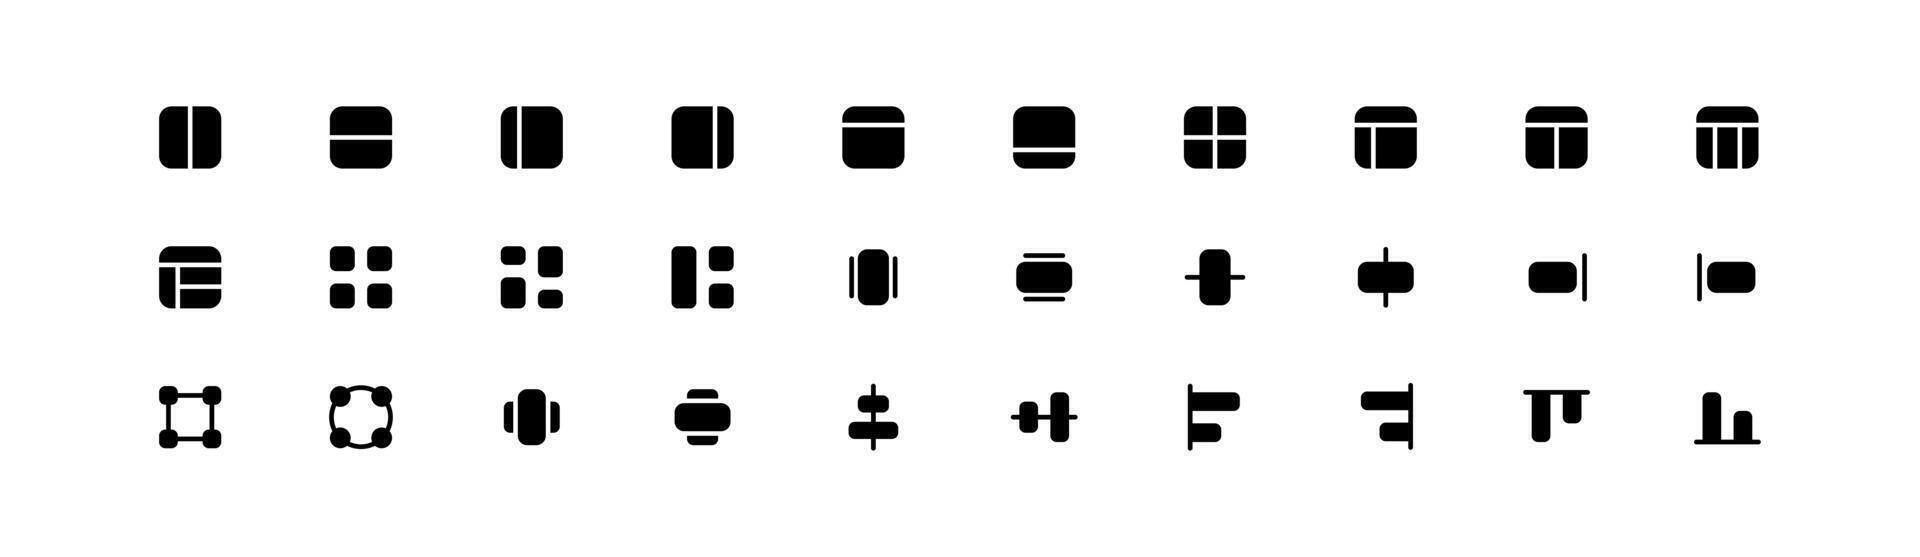 Alignment icons collection. Align icons set. Set of black editing and formatting icons. Different tools for design. Align signs and symbols set. vector